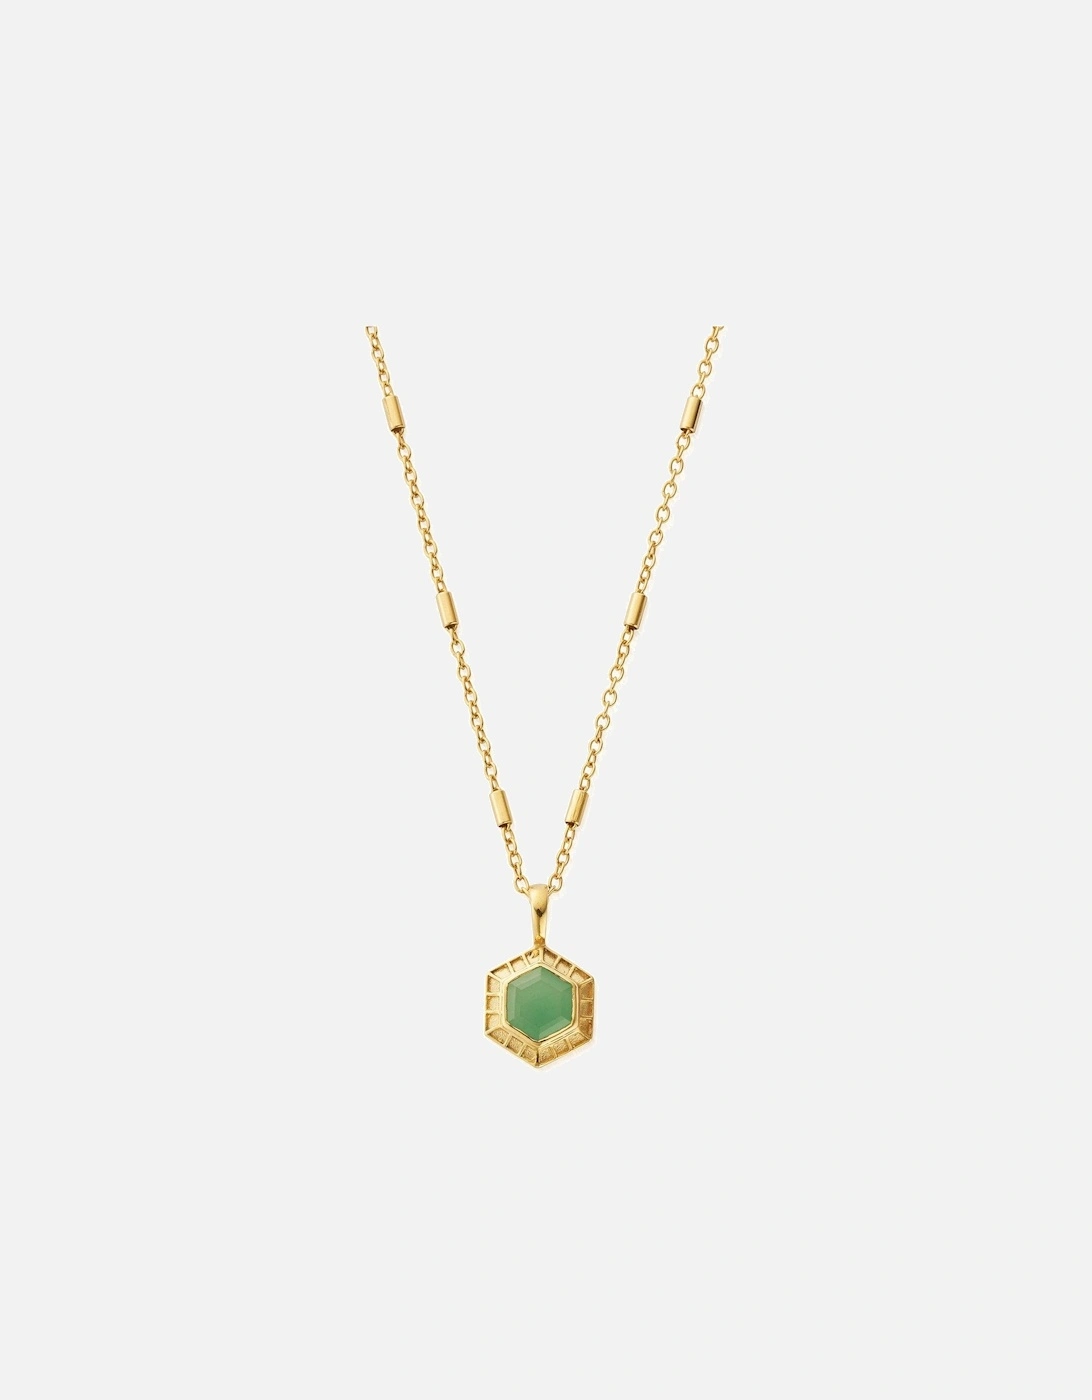 GOLD HAPPINESS AVENTURINE NECKLACE, 2 of 1